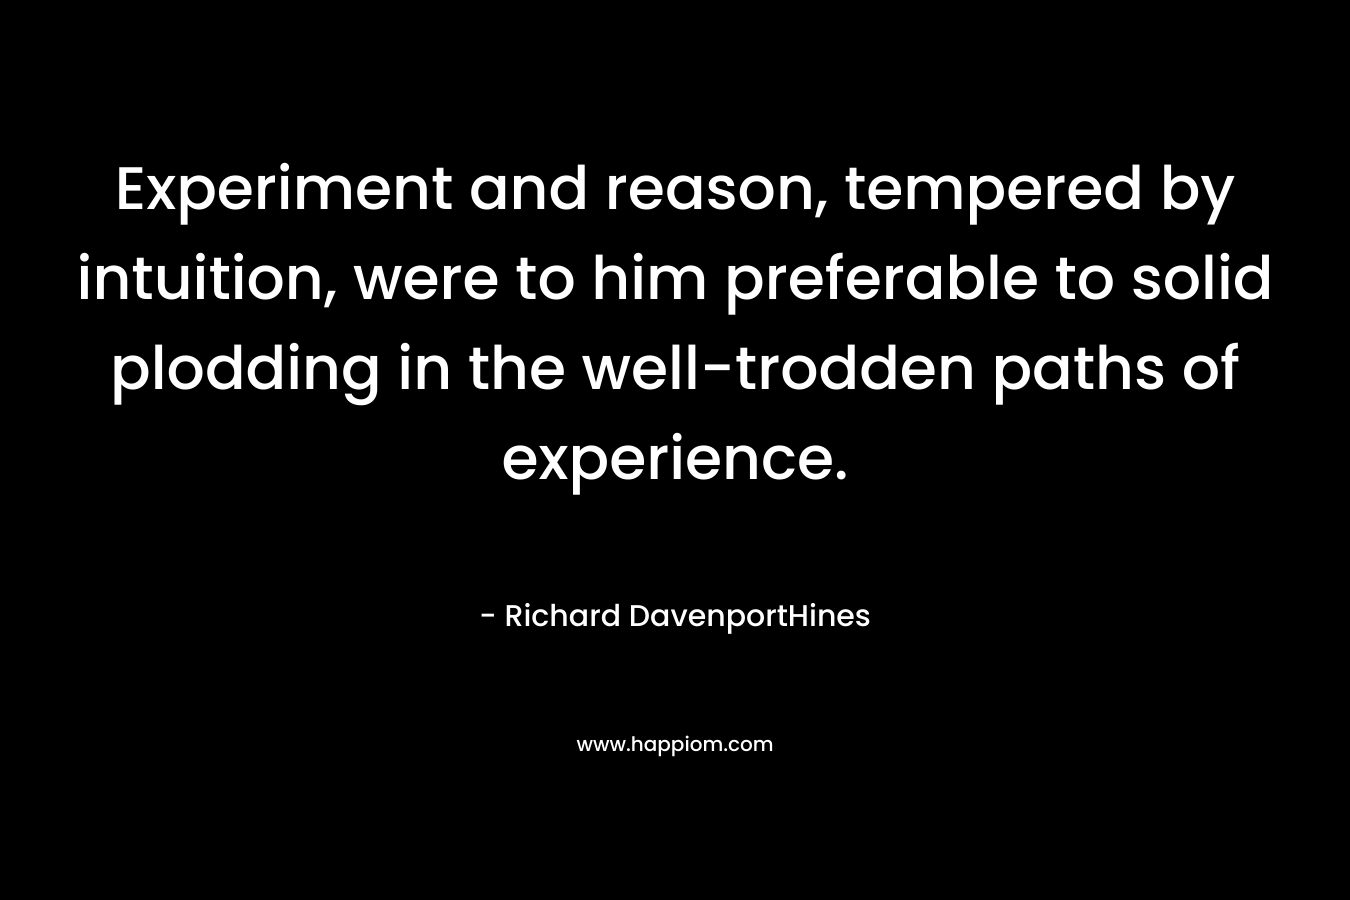 Experiment and reason, tempered by intuition, were to him preferable to solid plodding in the well-trodden paths of experience. – Richard DavenportHines